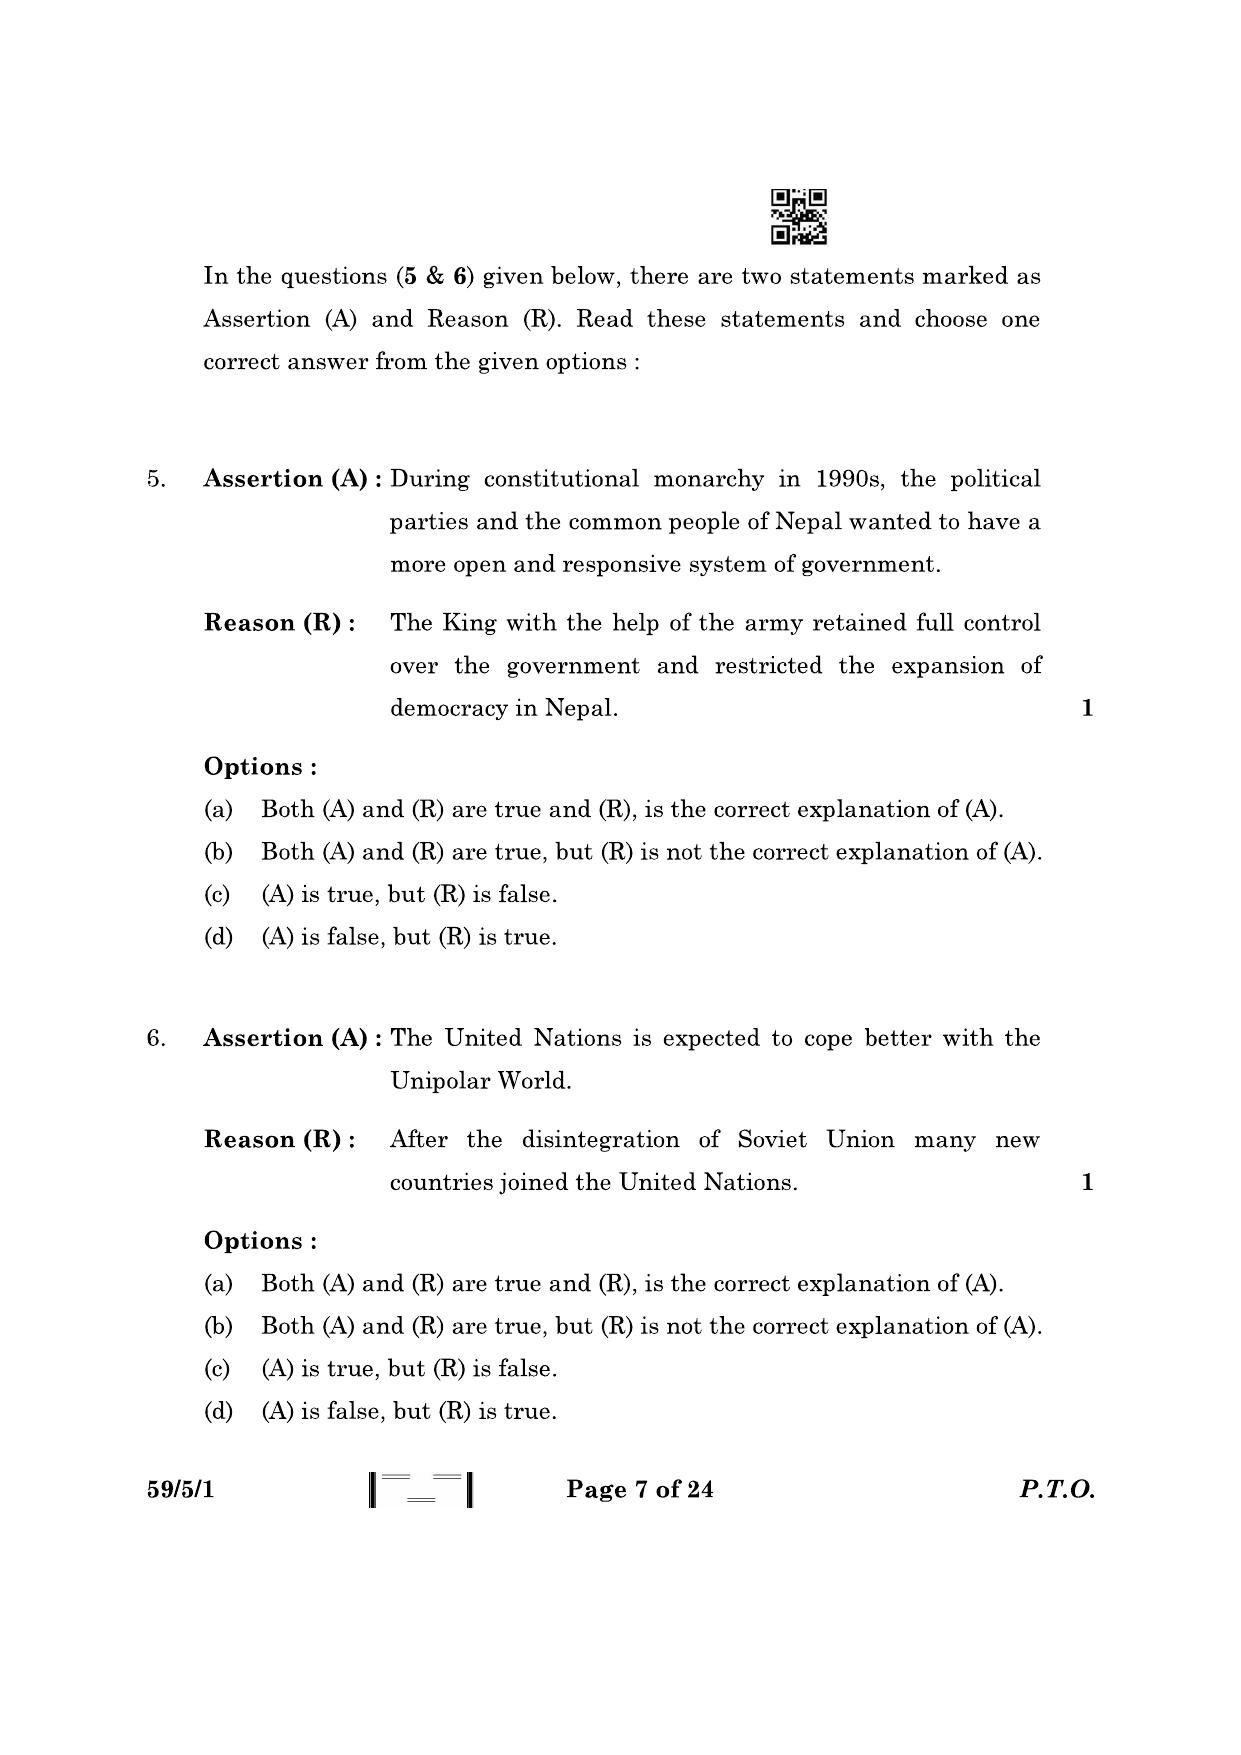 CBSE Class 12 59-5-1 Political Science 2023 Question Paper - Page 7